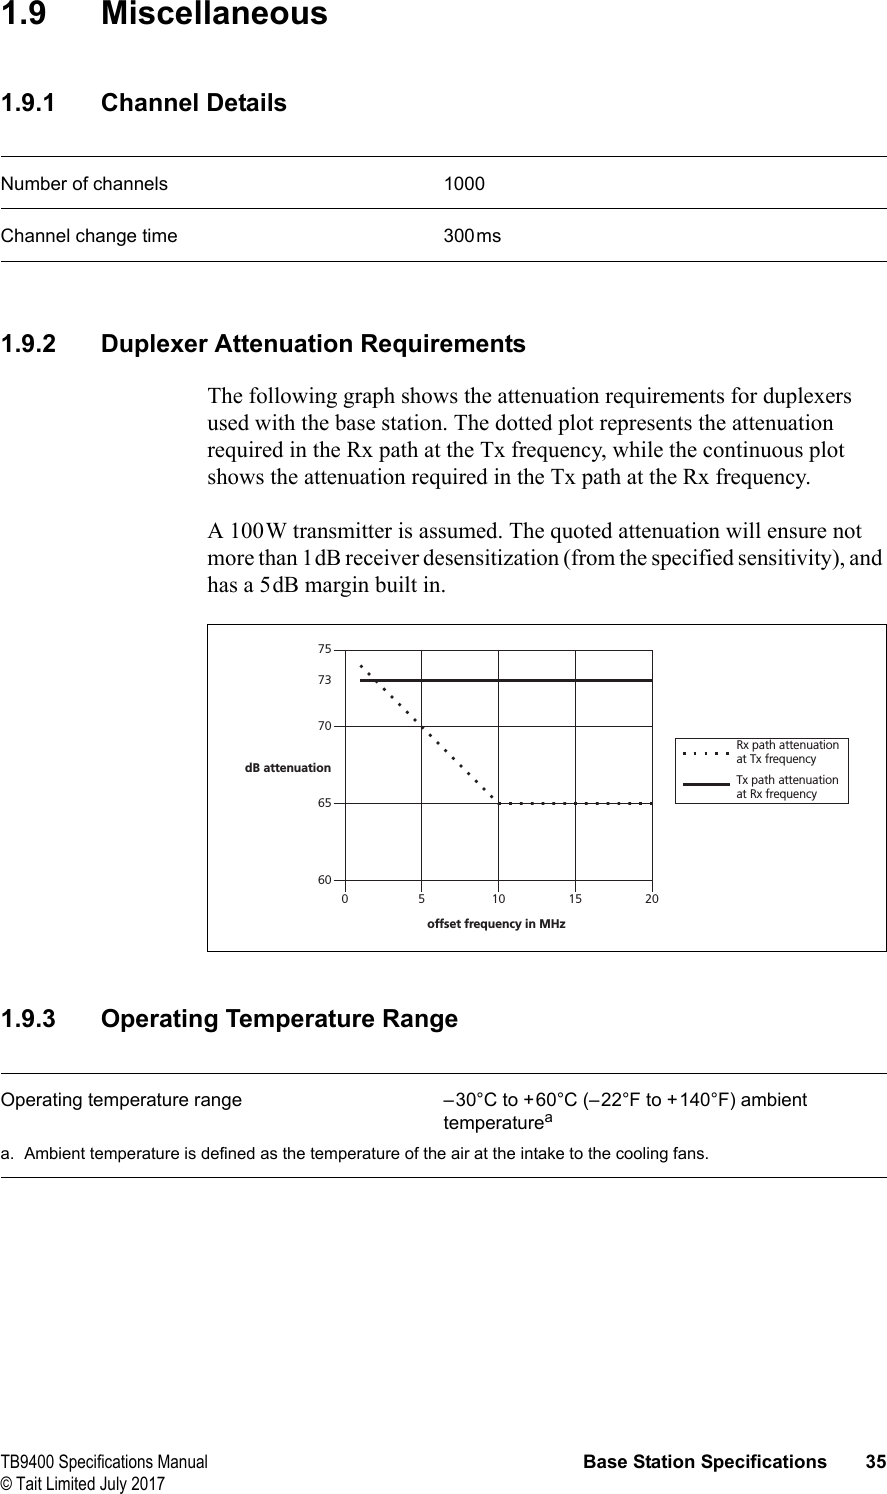  TB9400 Specifications Manual Base Station Specifications 35© Tait Limited July 20171.9 Miscellaneous1.9.1 Channel Details1.9.2 Duplexer Attenuation RequirementsThe following graph shows the attenuation requirements for duplexers used with the base station. The dotted plot represents the attenuation required in the Rx path at the Tx frequency, while the continuous plot shows the attenuation required in the Tx path at the Rx frequency.A 100W transmitter is assumed. The quoted attenuation will ensure not more than 1dB receiver desensitization (from the specified sensitivity), and has a 5dB margin built in.1.9.3 Operating Temperature RangeNumber of channels 1000Channel change time 300ms60657073750 5 10 15 20Rx path attenuationat Tx frequencyTx path attenuationat Rx frequencydB attenuationoffset frequency in MHzOperating temperature range –30°C to +60°C (–22°F to +140°F) ambient temperatureaa. Ambient temperature is defined as the temperature of the air at the intake to the cooling fans.